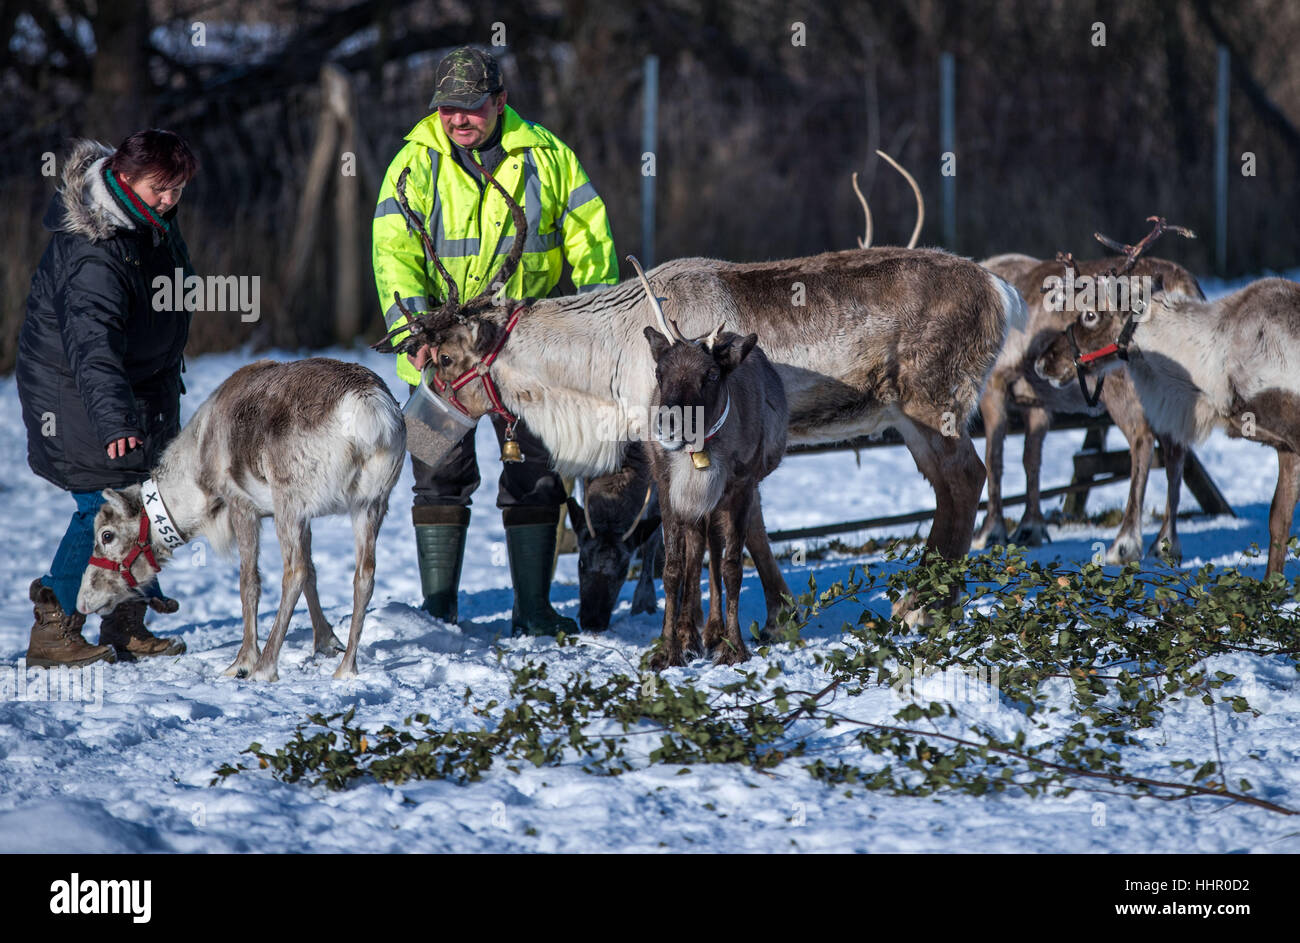 Reindeer breeder Andreas Hoffmann and his wife Cornelia feed the reindeer in one of the enclosures at their reindeer farm in Strasen near Wesenberg, Germany, 16 January 2017. The reindeer in the Mecklenburg Lake District feel almost at home in Lapland with the current winter weather. Since 2009 the deer, which are used to extreme cold and are actually home to the tundra, are being bred professionally. Over the next years the herd will grow from 30 to 50 animals, and then reindeer meat sausages will be produced that are to be sold in the farm store. Photo: Jens Büttner/dpa-Zentralbild/dpa Stock Photo